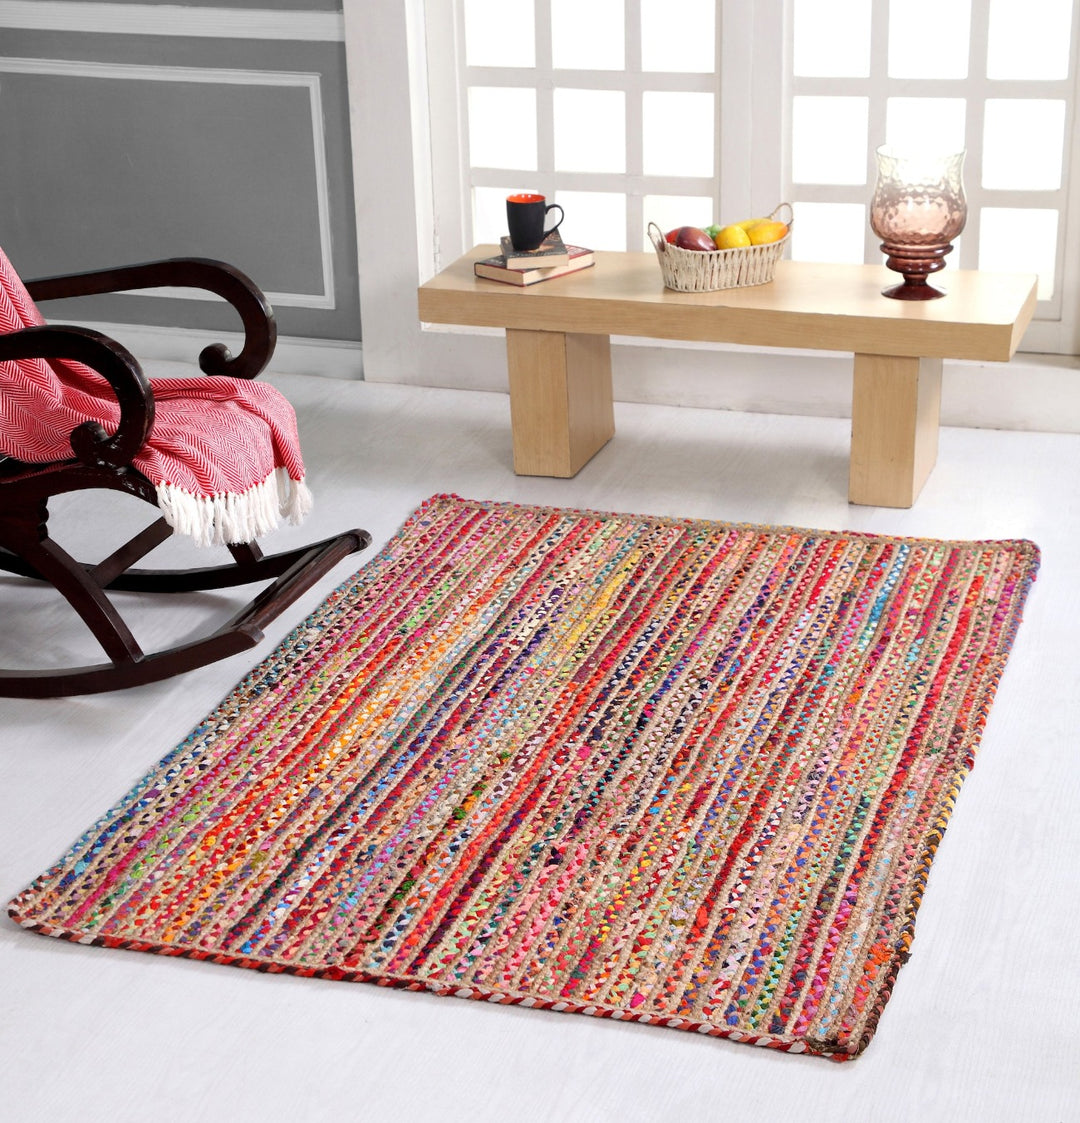 Mishran Large Area Rectangle Braided Jute Fabric Rug Second Nature Online